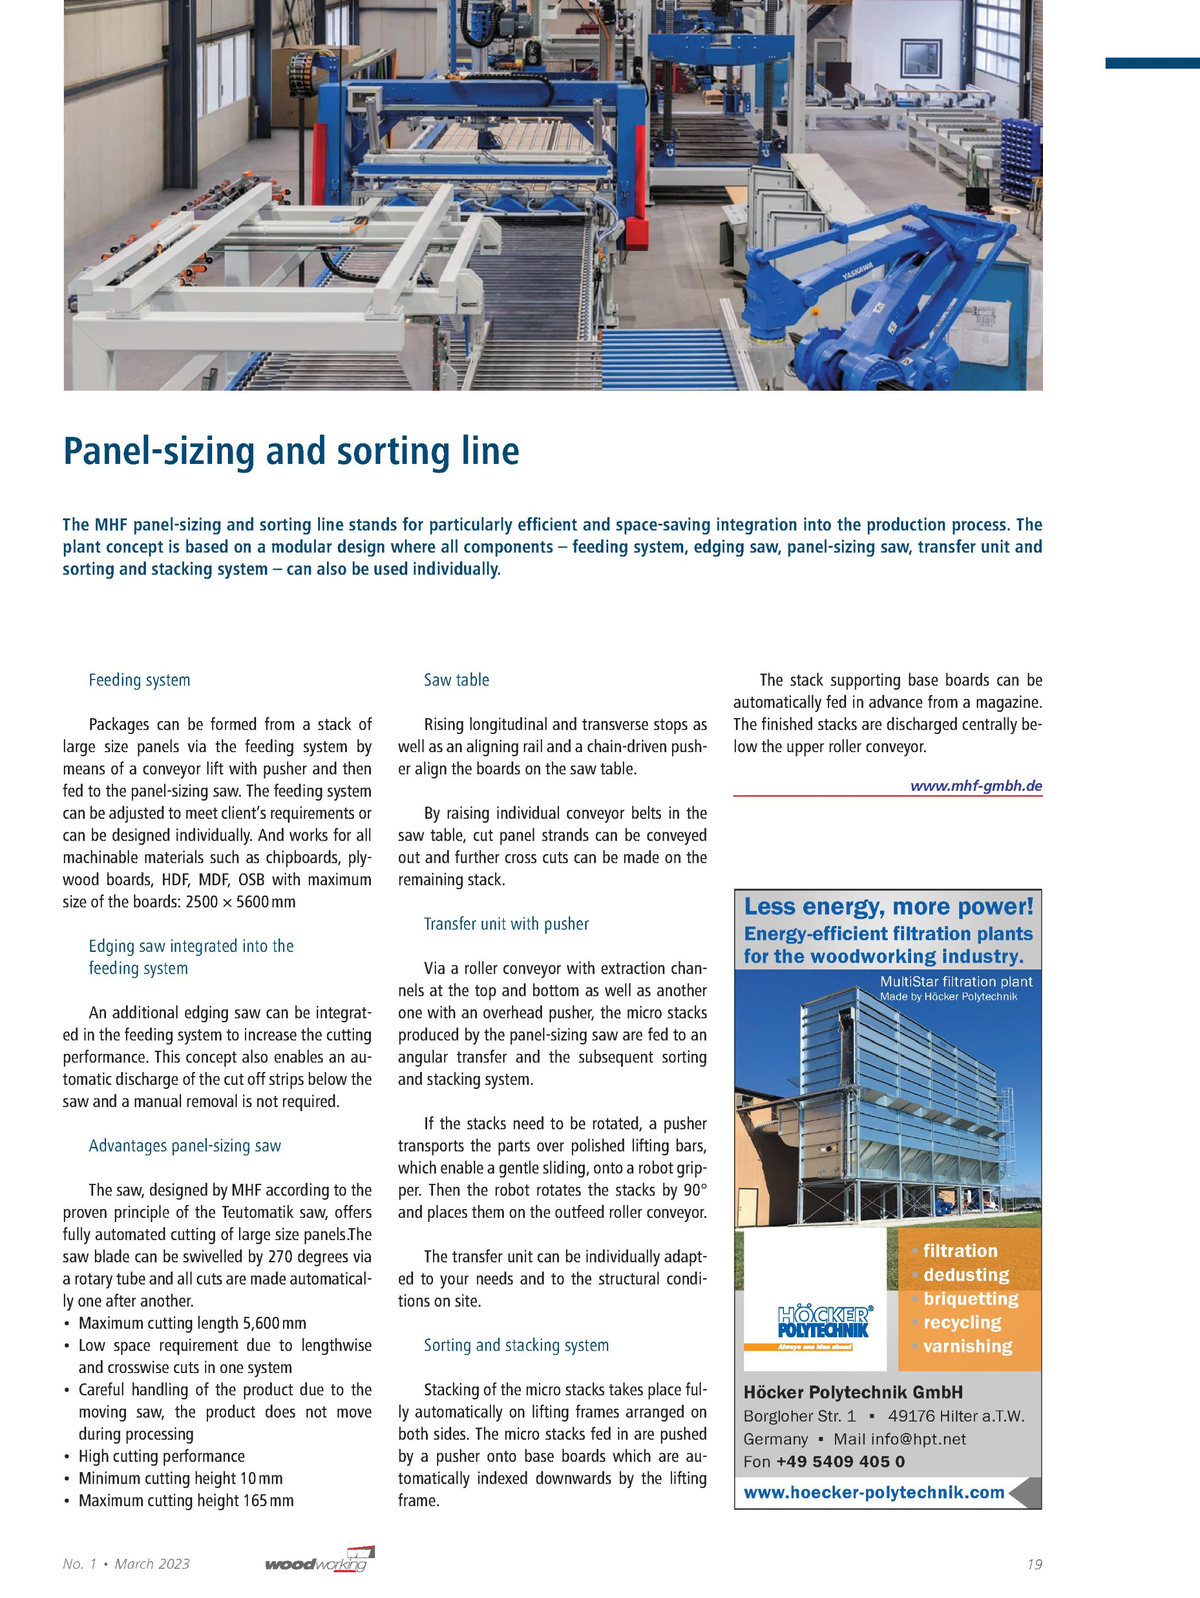 MHF Panel-sizing and sorting line